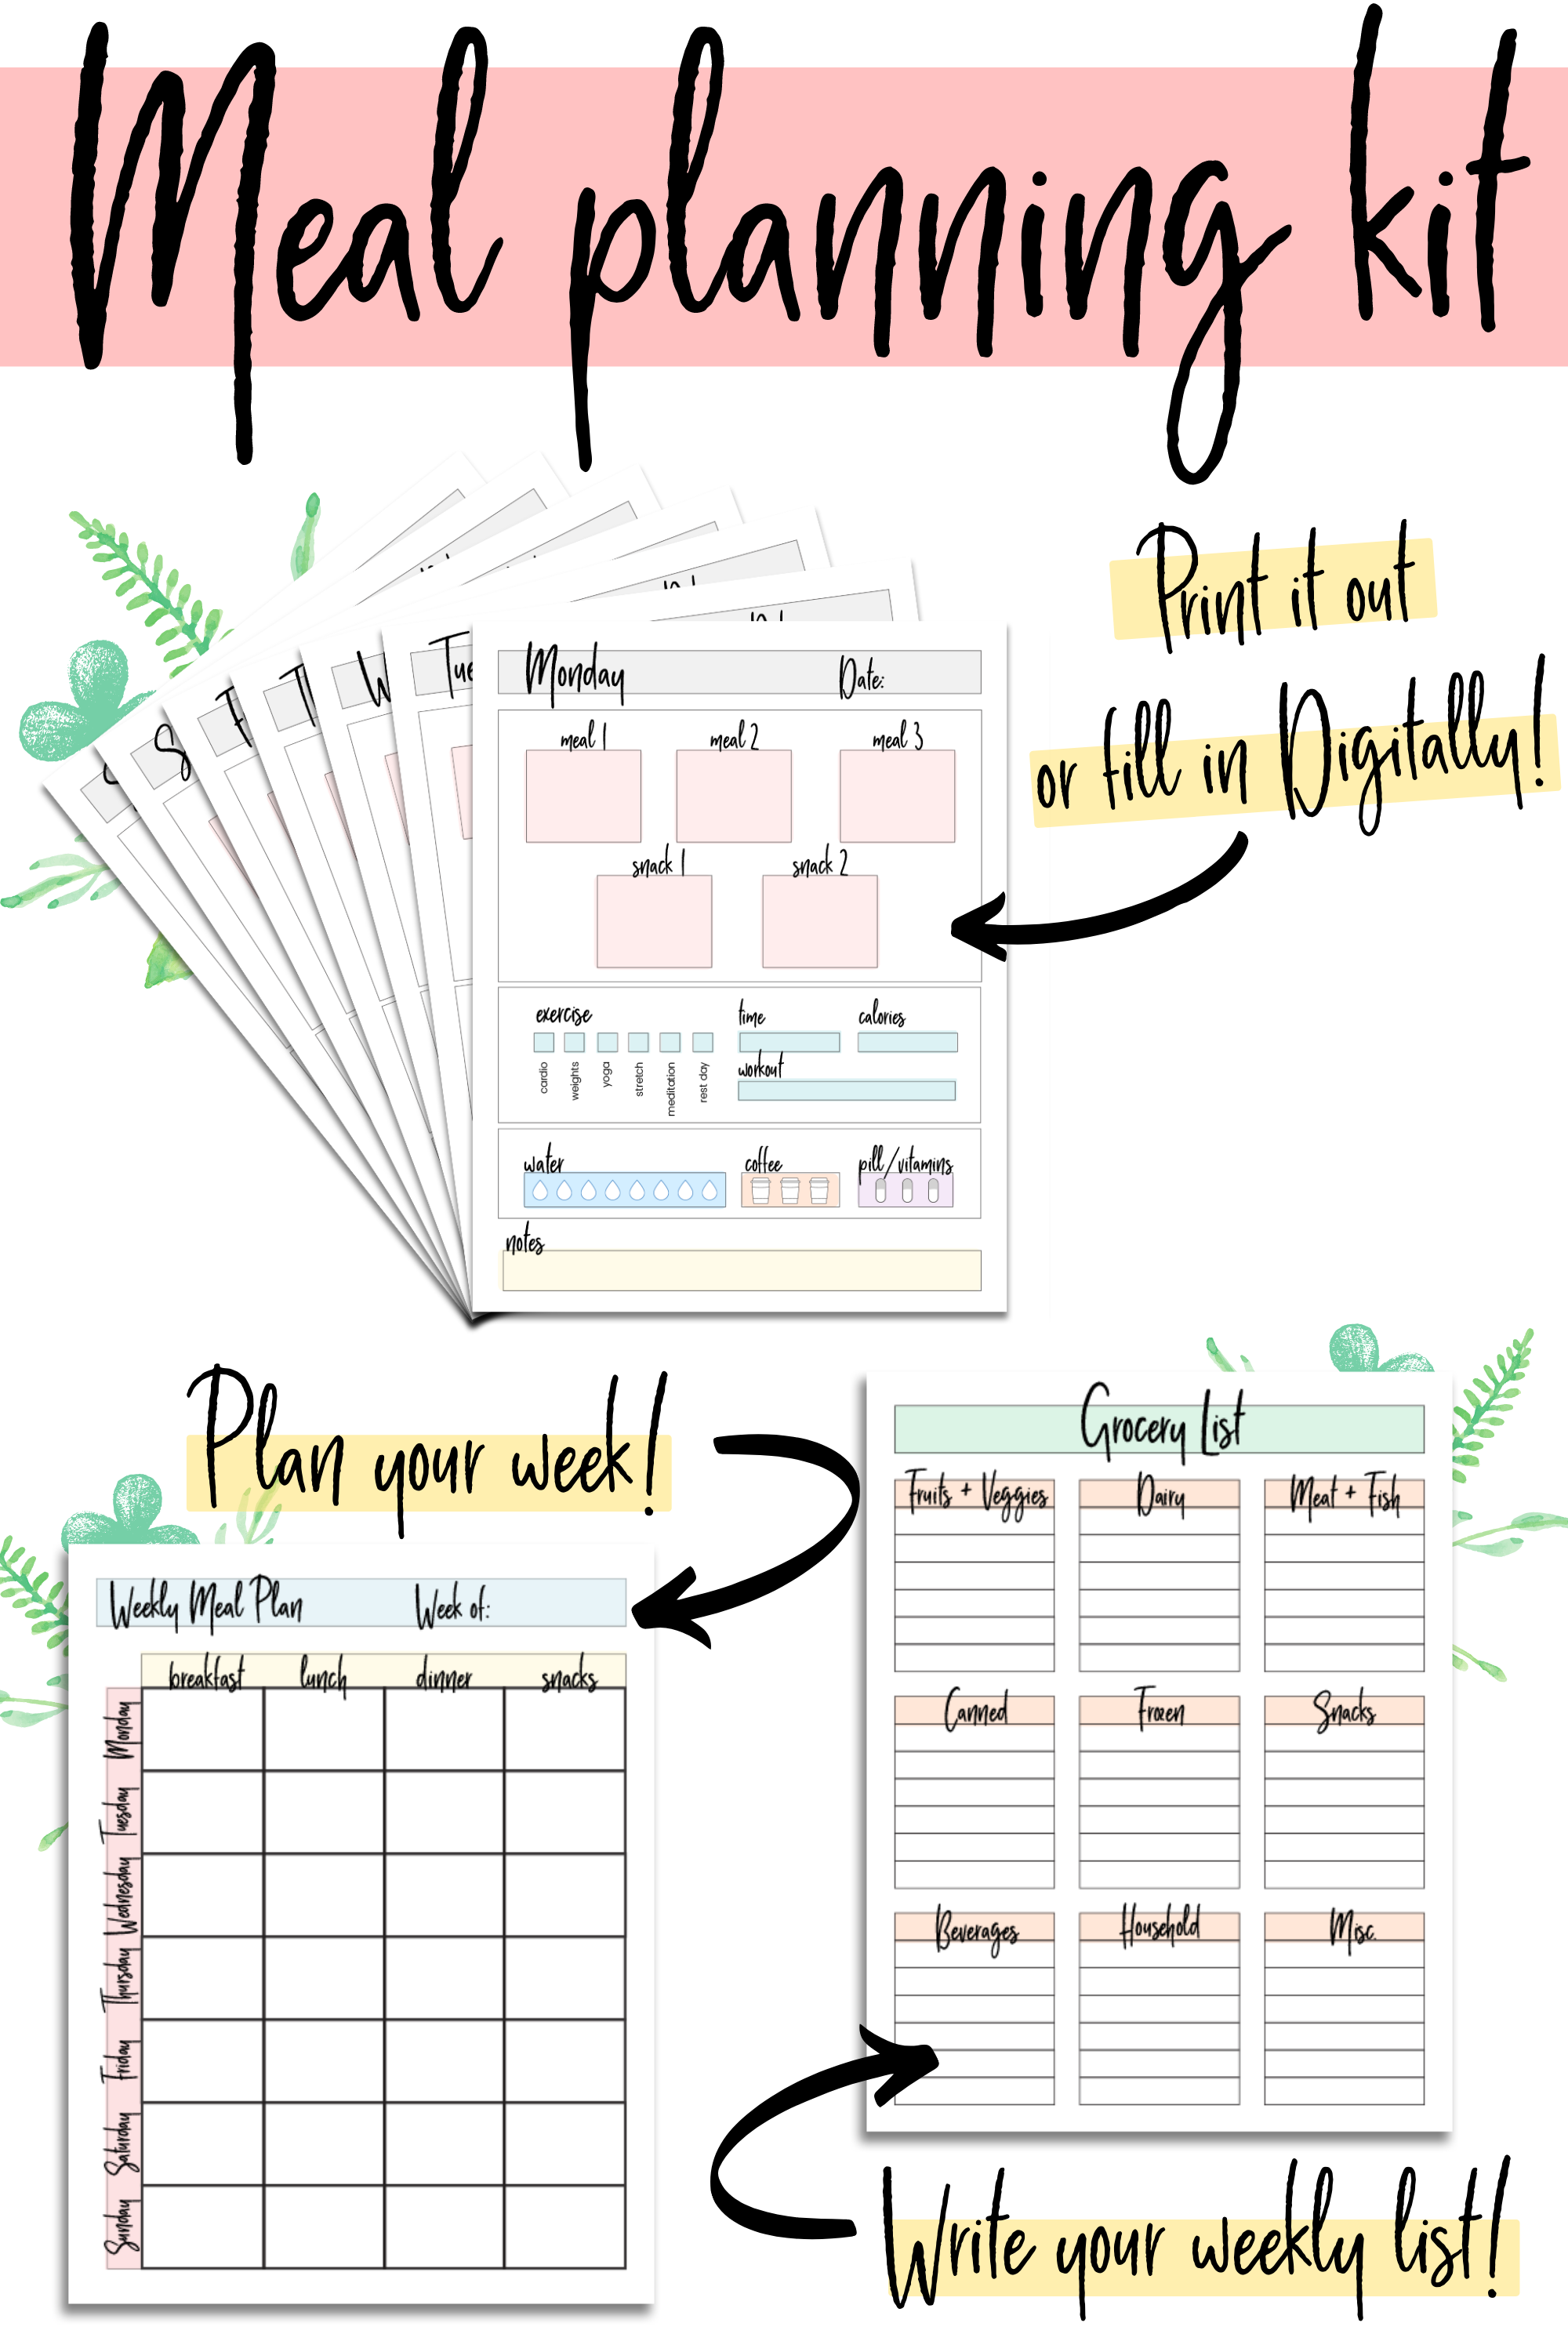 Weekly Meal Planner Printable ~ Fitness Planner Template ~ Daily Meal Planner ~ Health Planner ~ fitness tracker ~ meal plan ~ meal planning -   18 fitness Planner quotes ideas